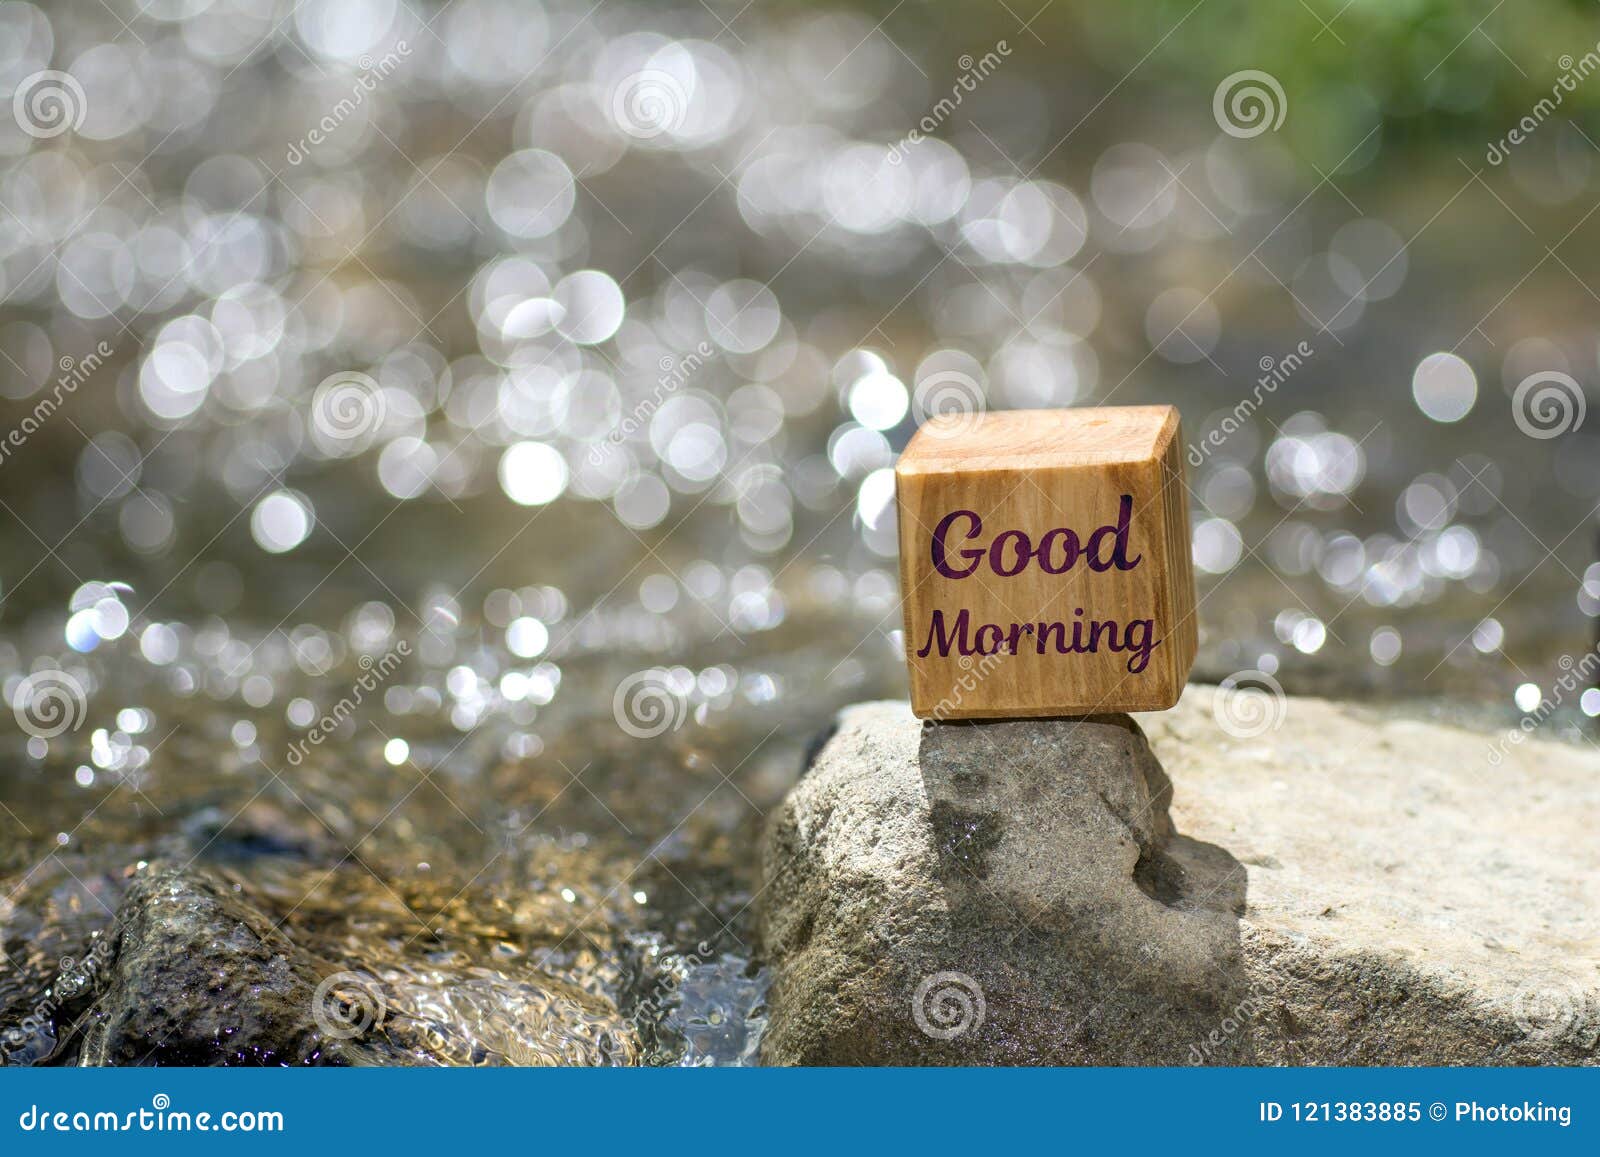 Good Morning on Wooden Block Stock Image - Image of flowing ...